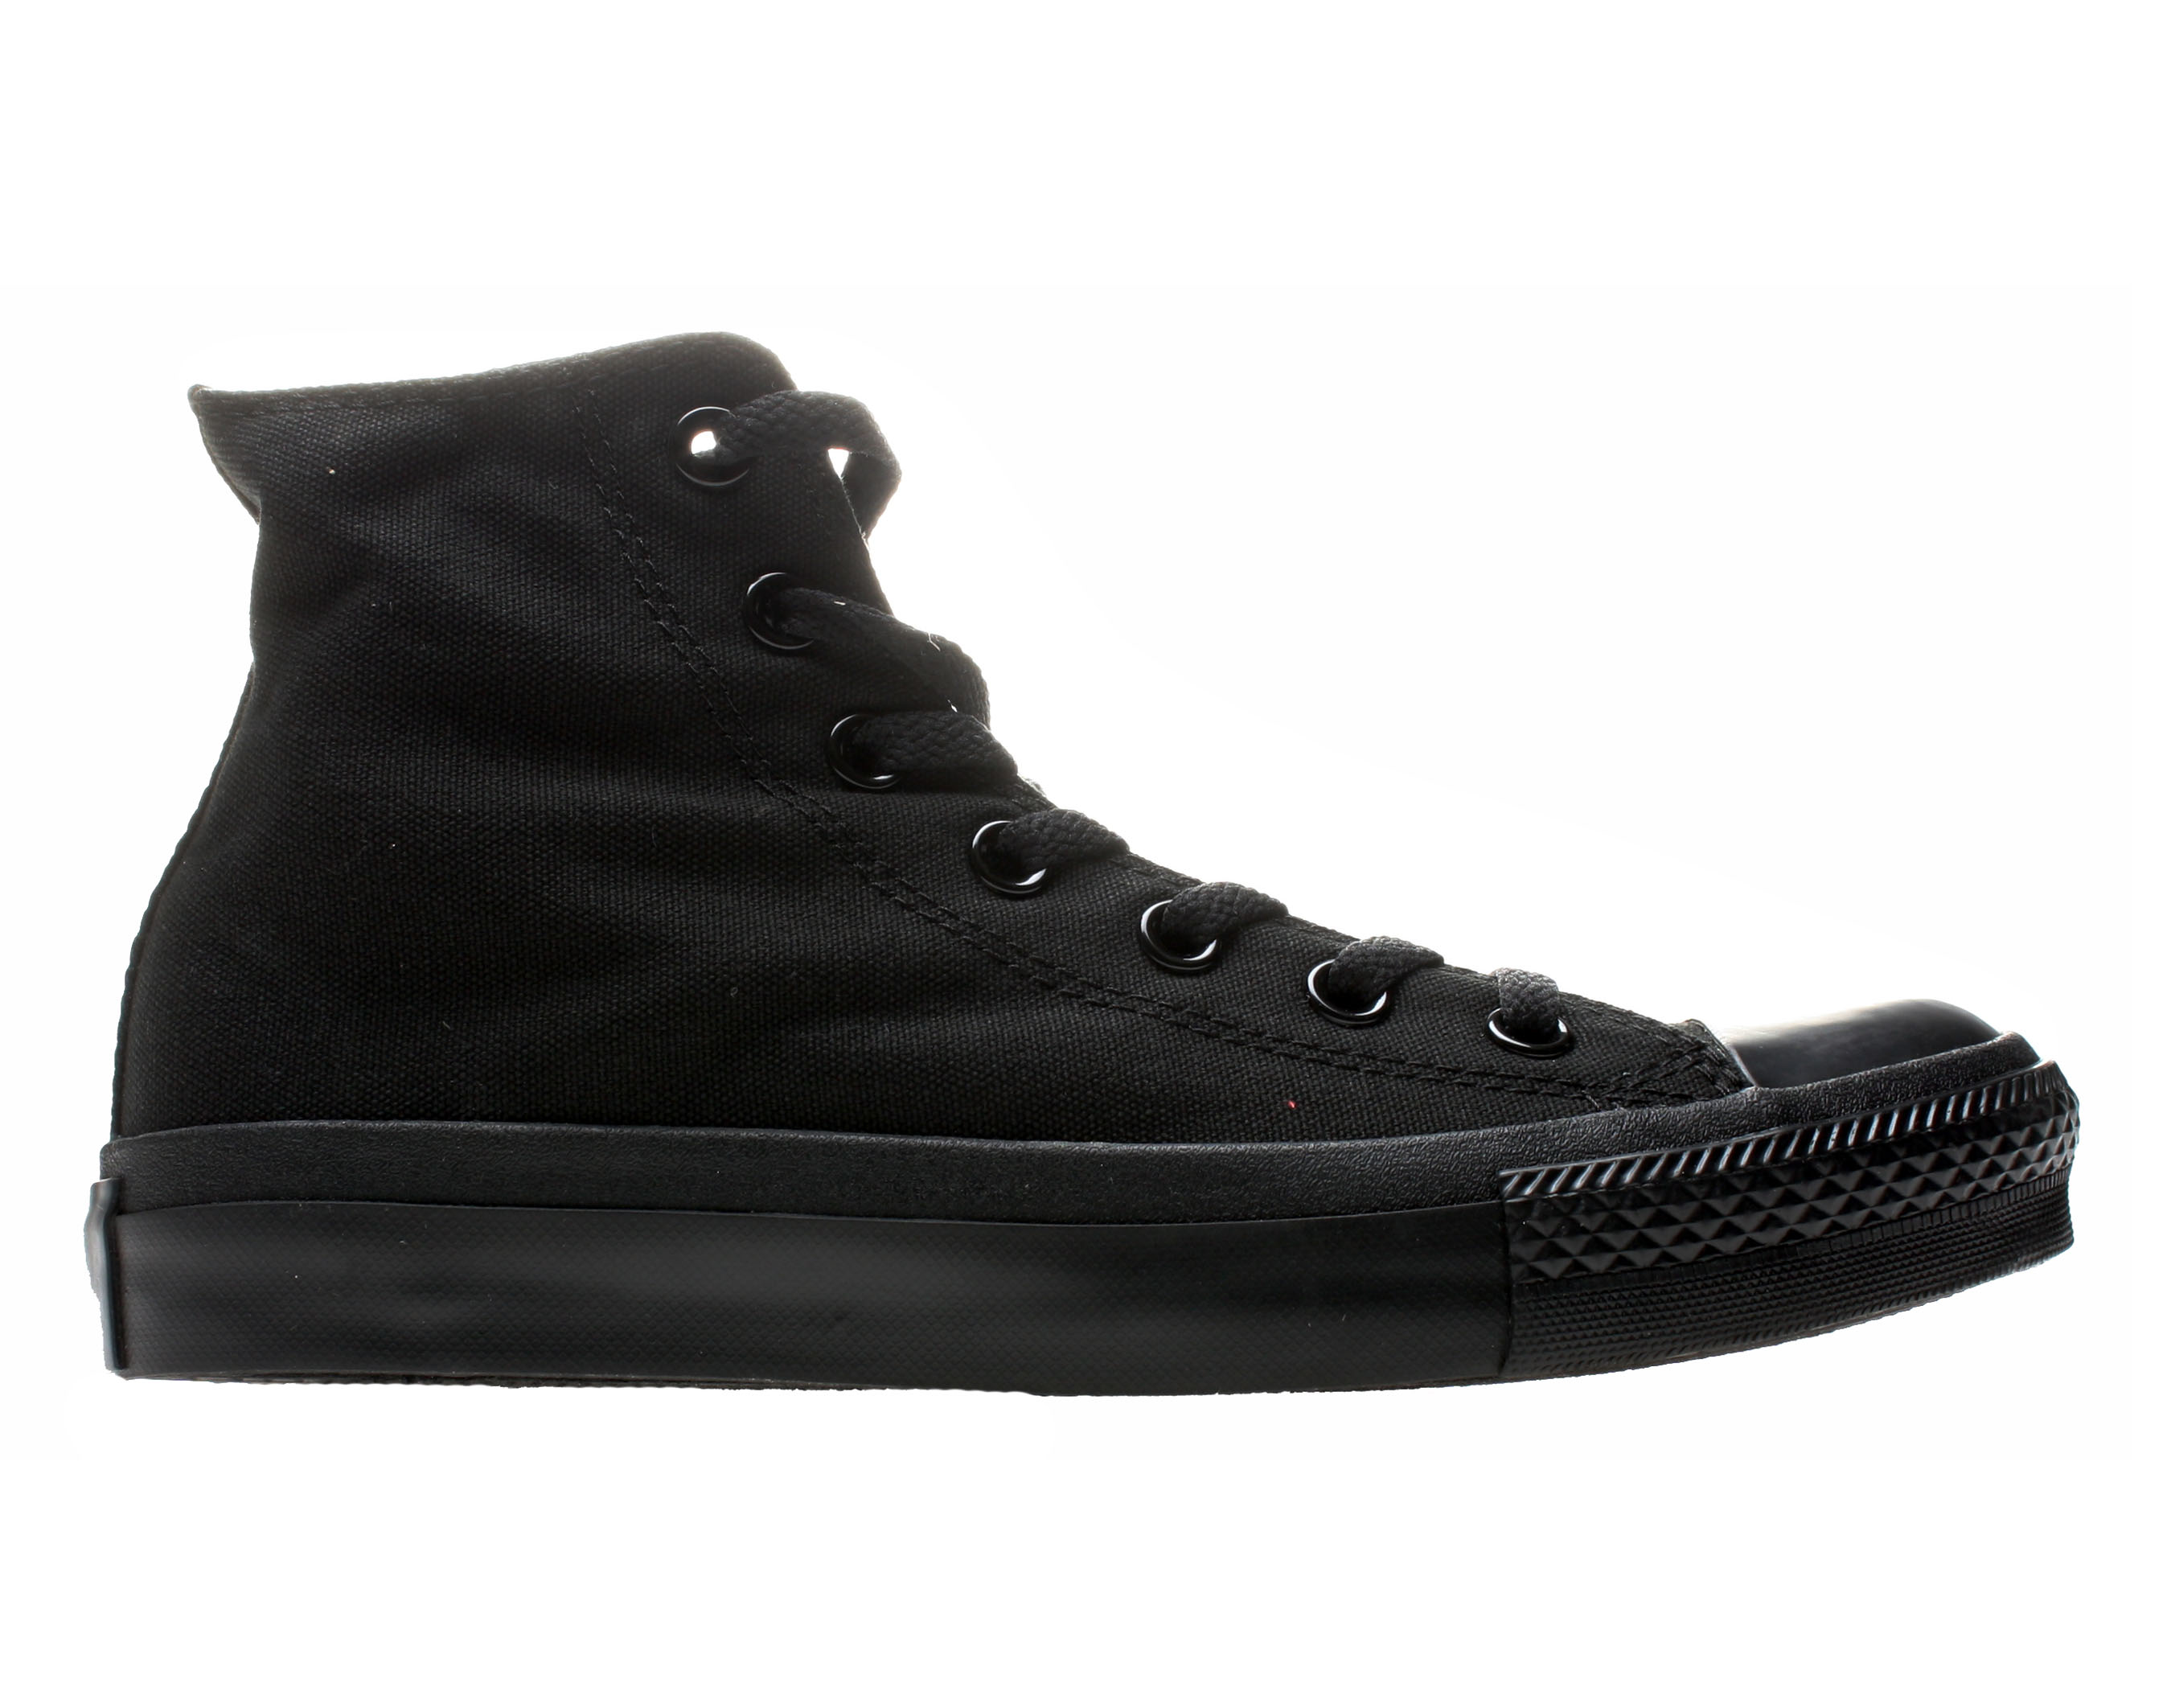 Converse Chuck Taylor All Star High Top Sneaker - image 2 of 6